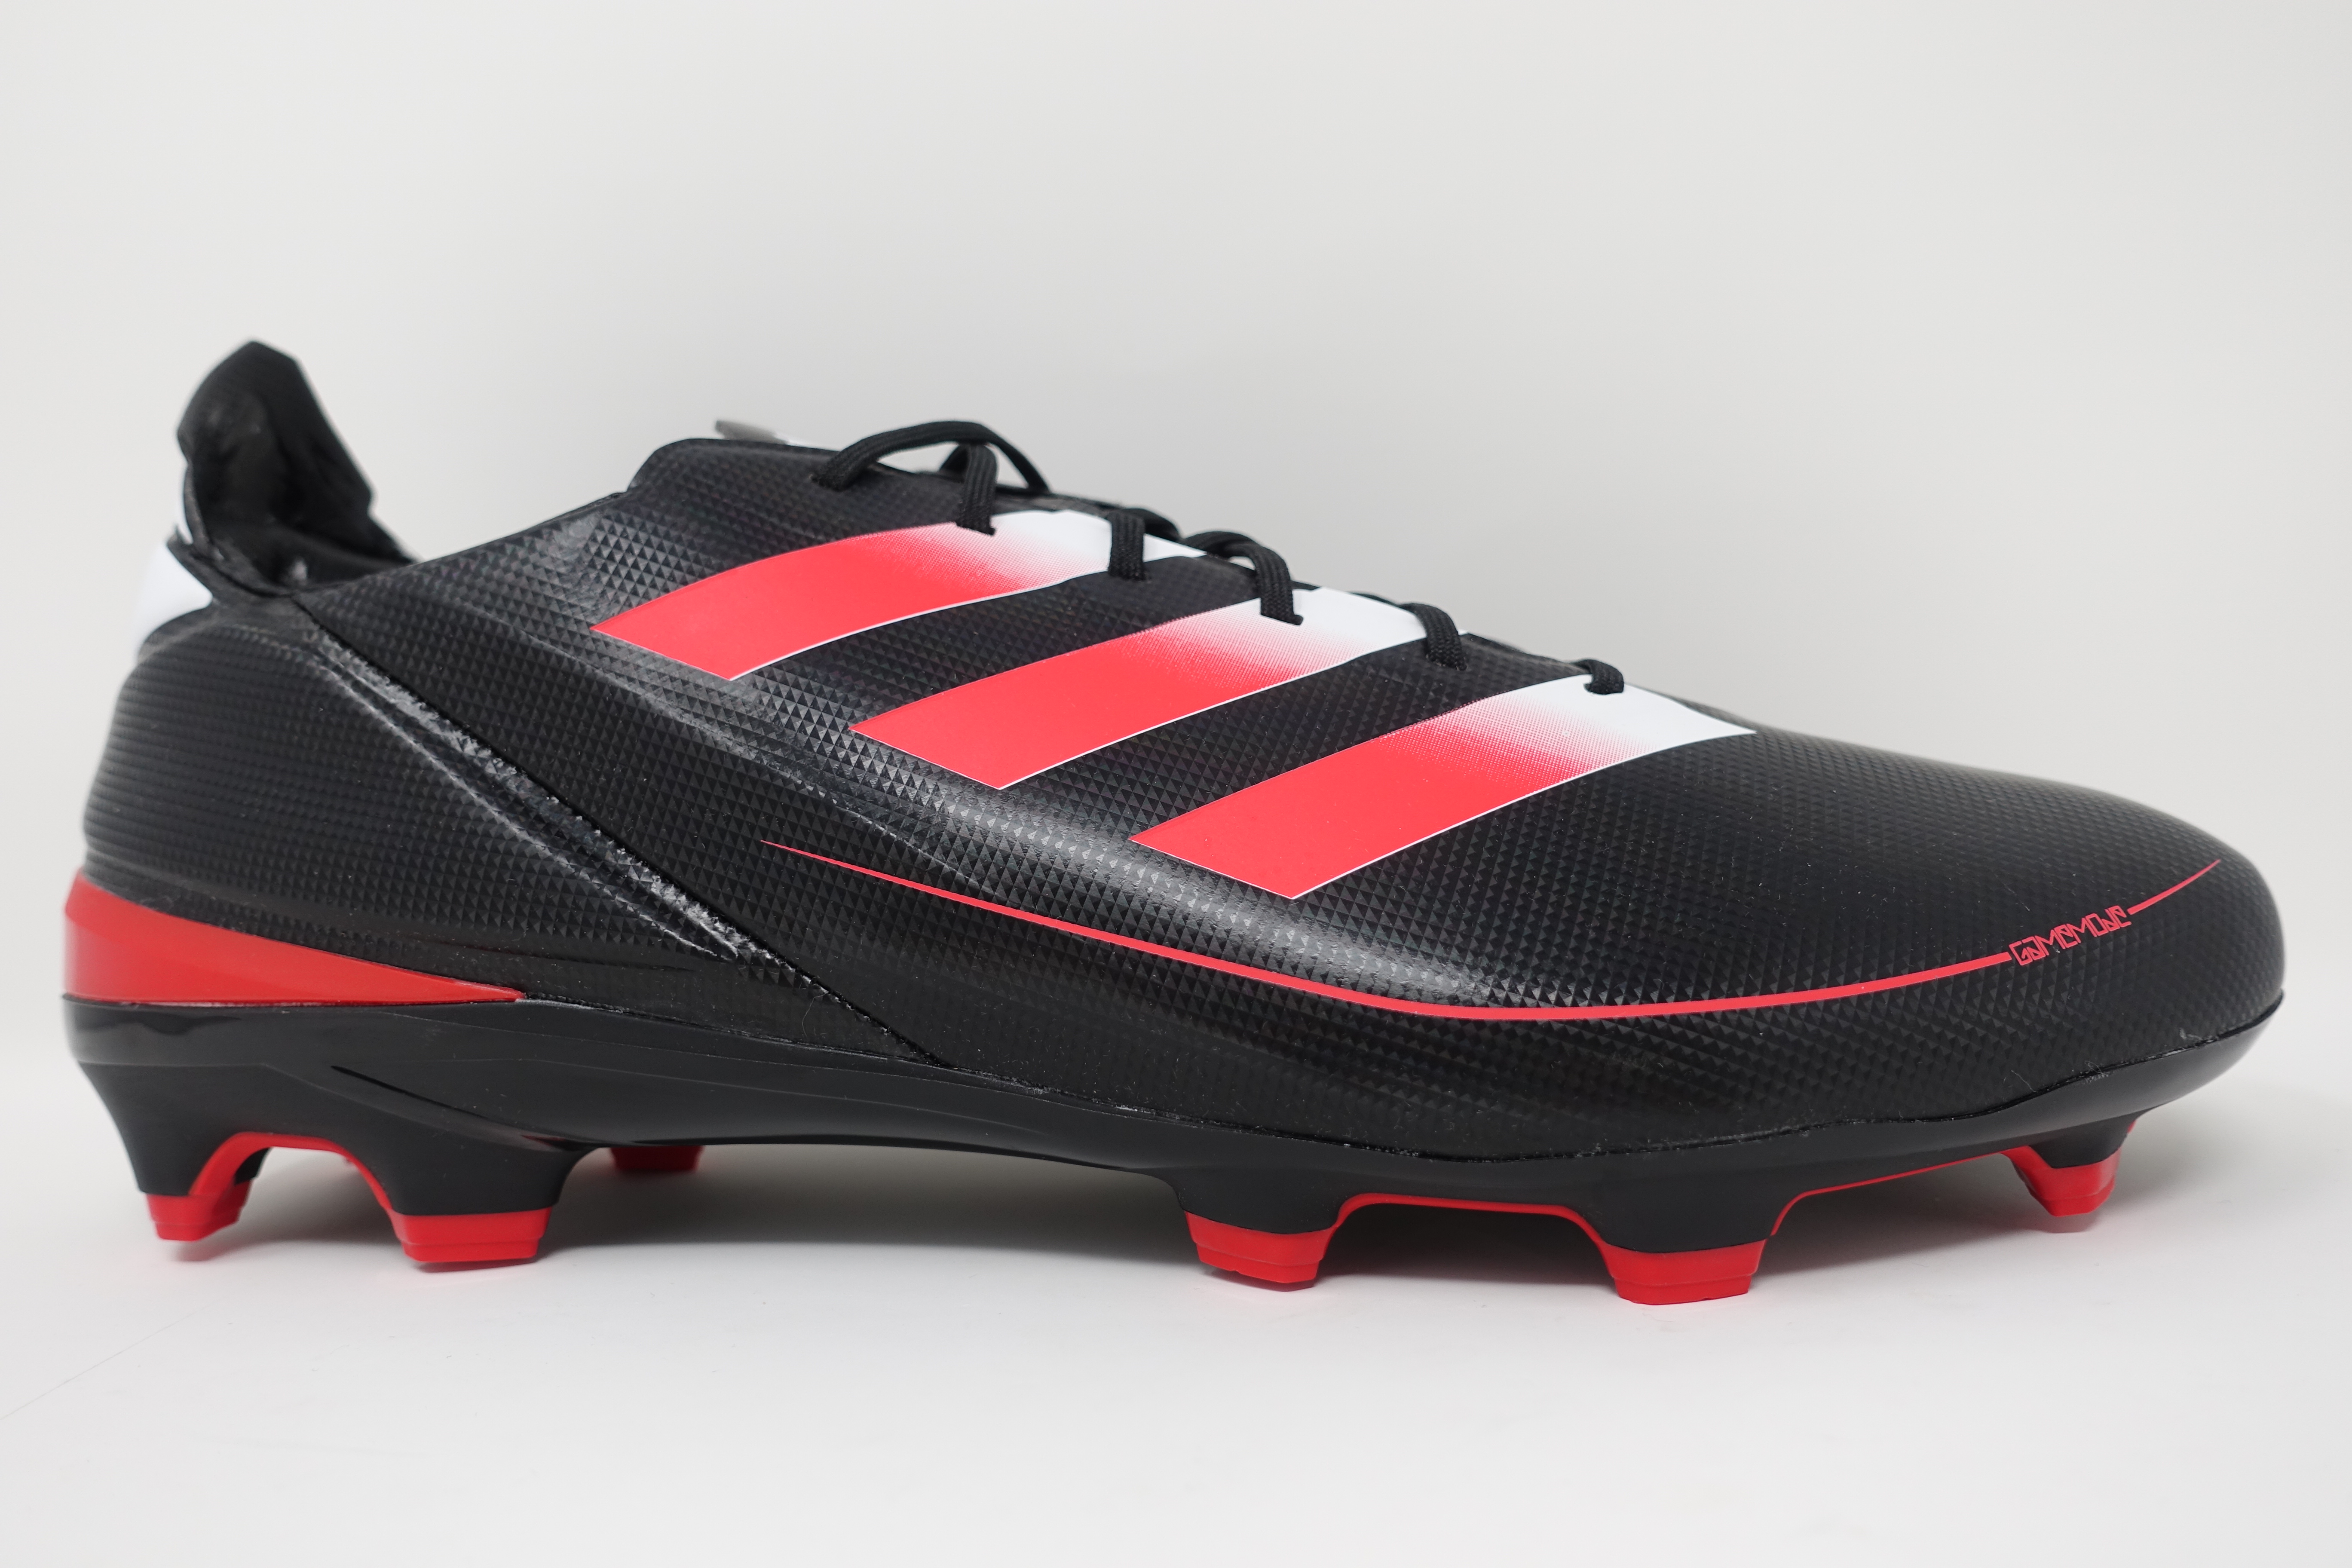 adidas-Gamemode-Synthetic-Color-Mode-Pack-Soccer-Football-Boots-3